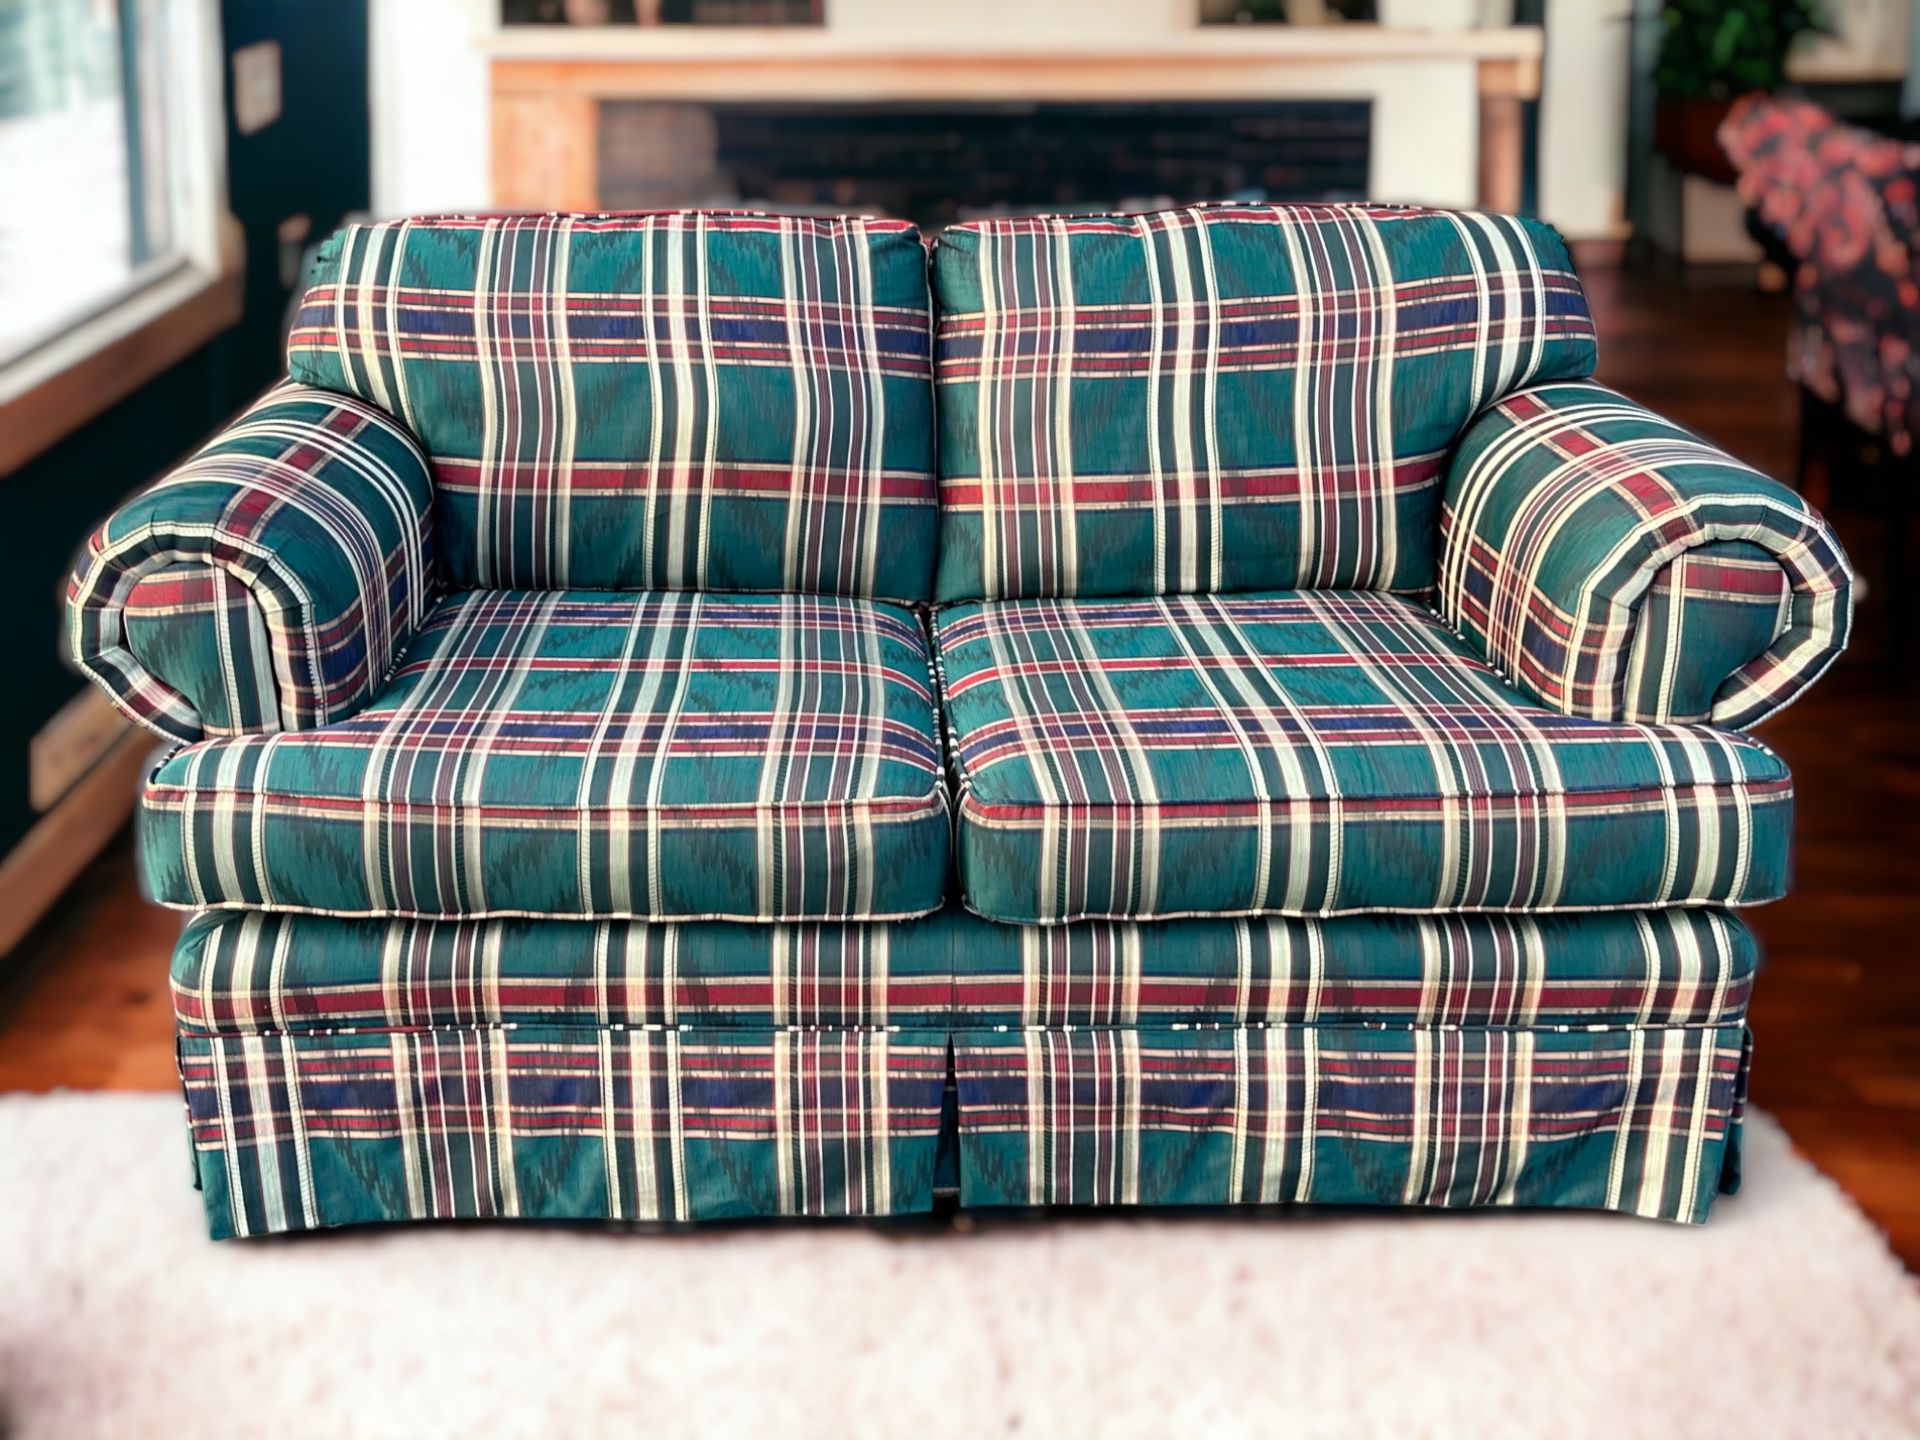 Hickory Hill Plaid Fabric Loveseat w/ Padded Sock Armrests